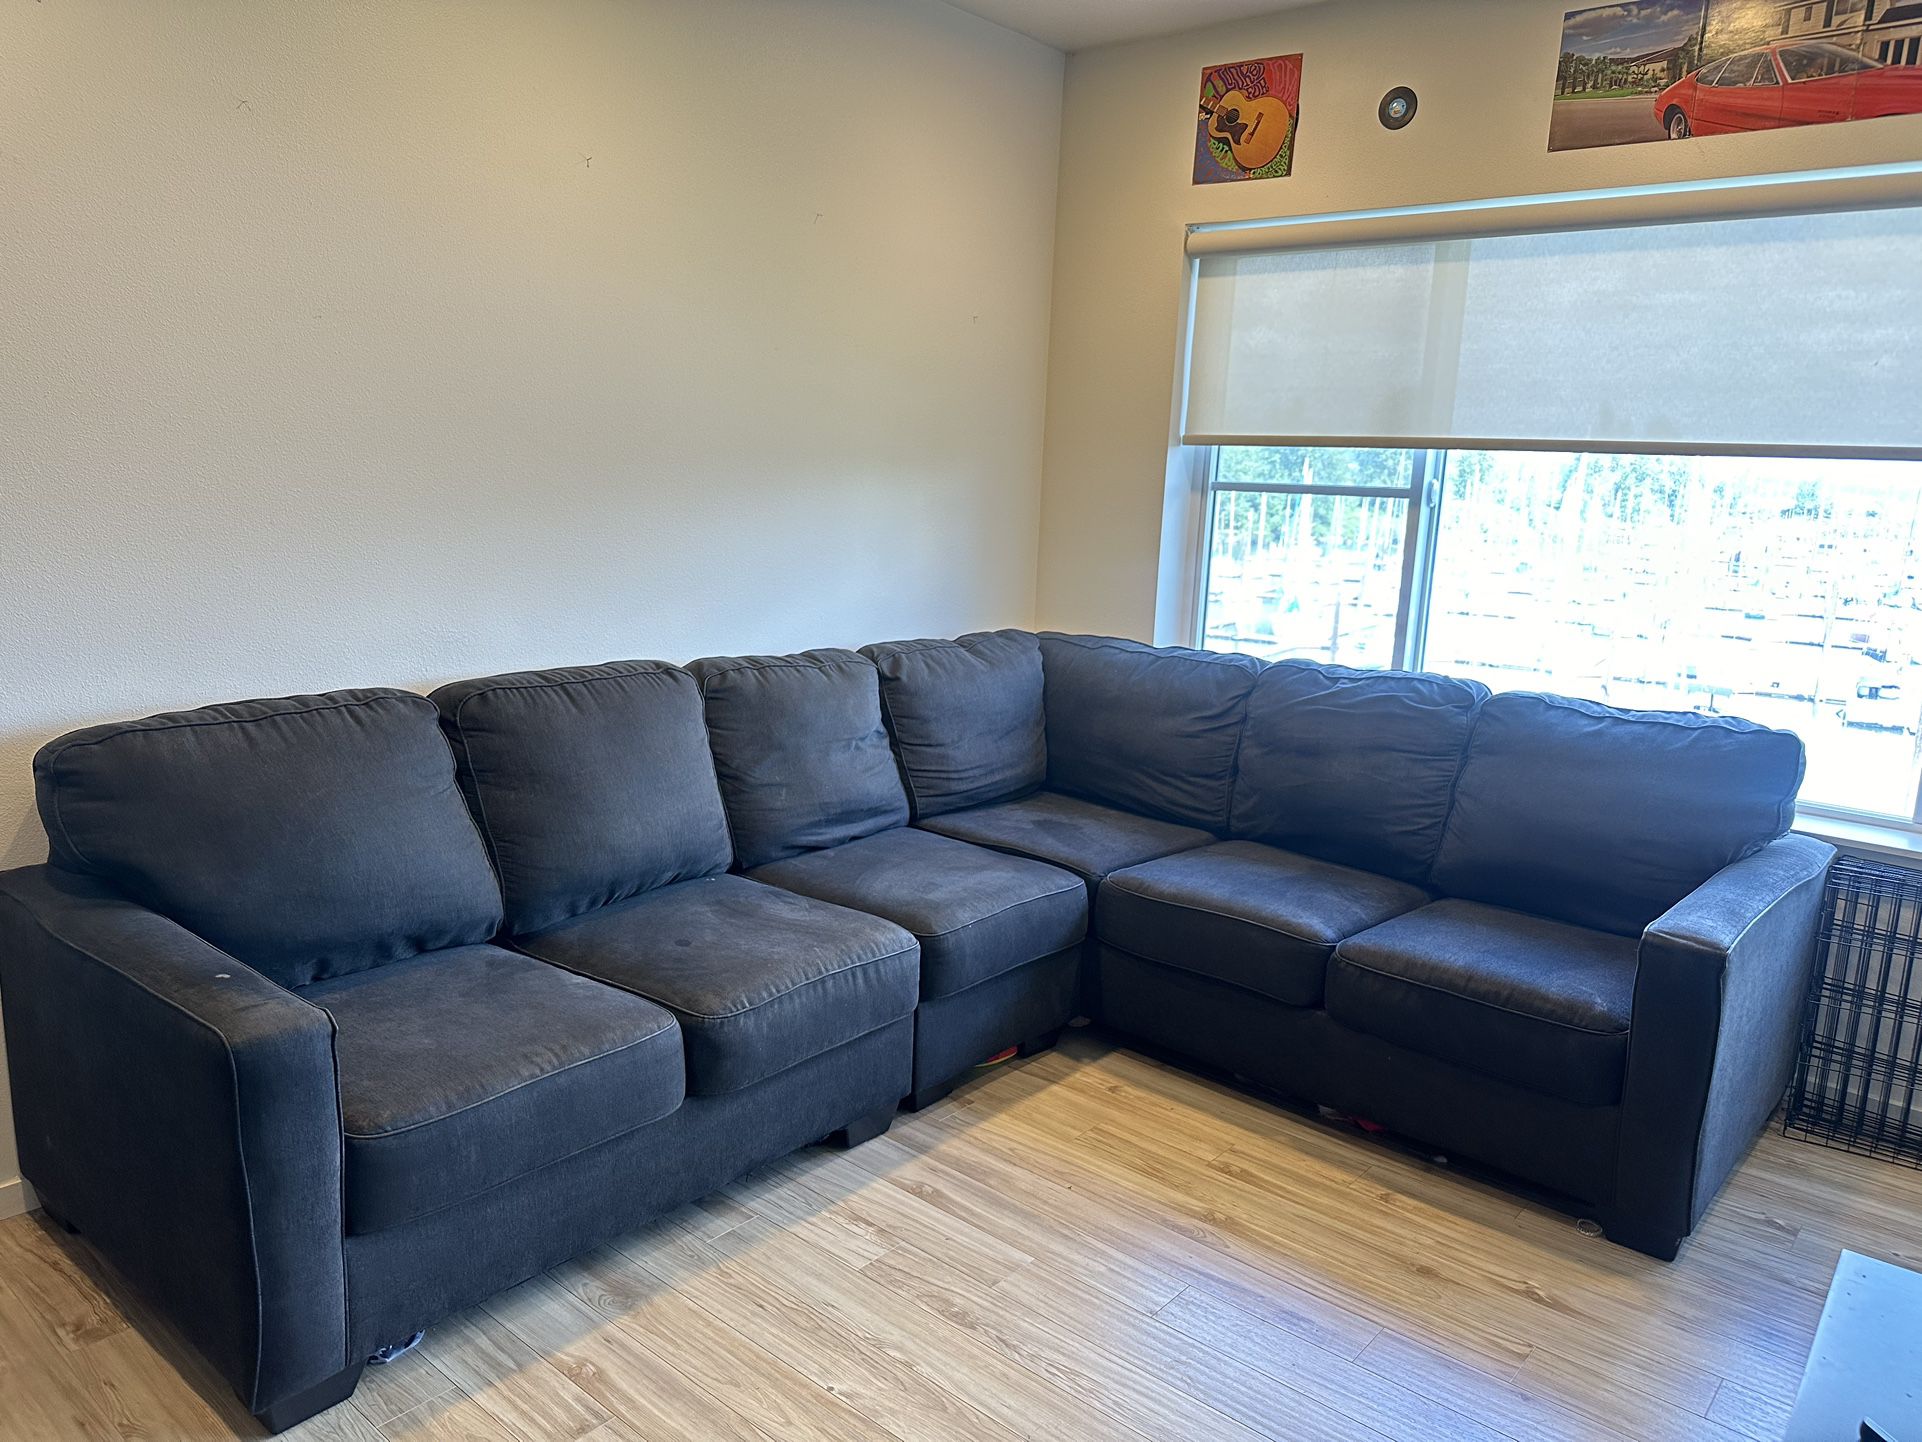 *PENDING SALE*ASHLEYS FURNITURE SECTIONAL COUCH “SLATE” GREY 